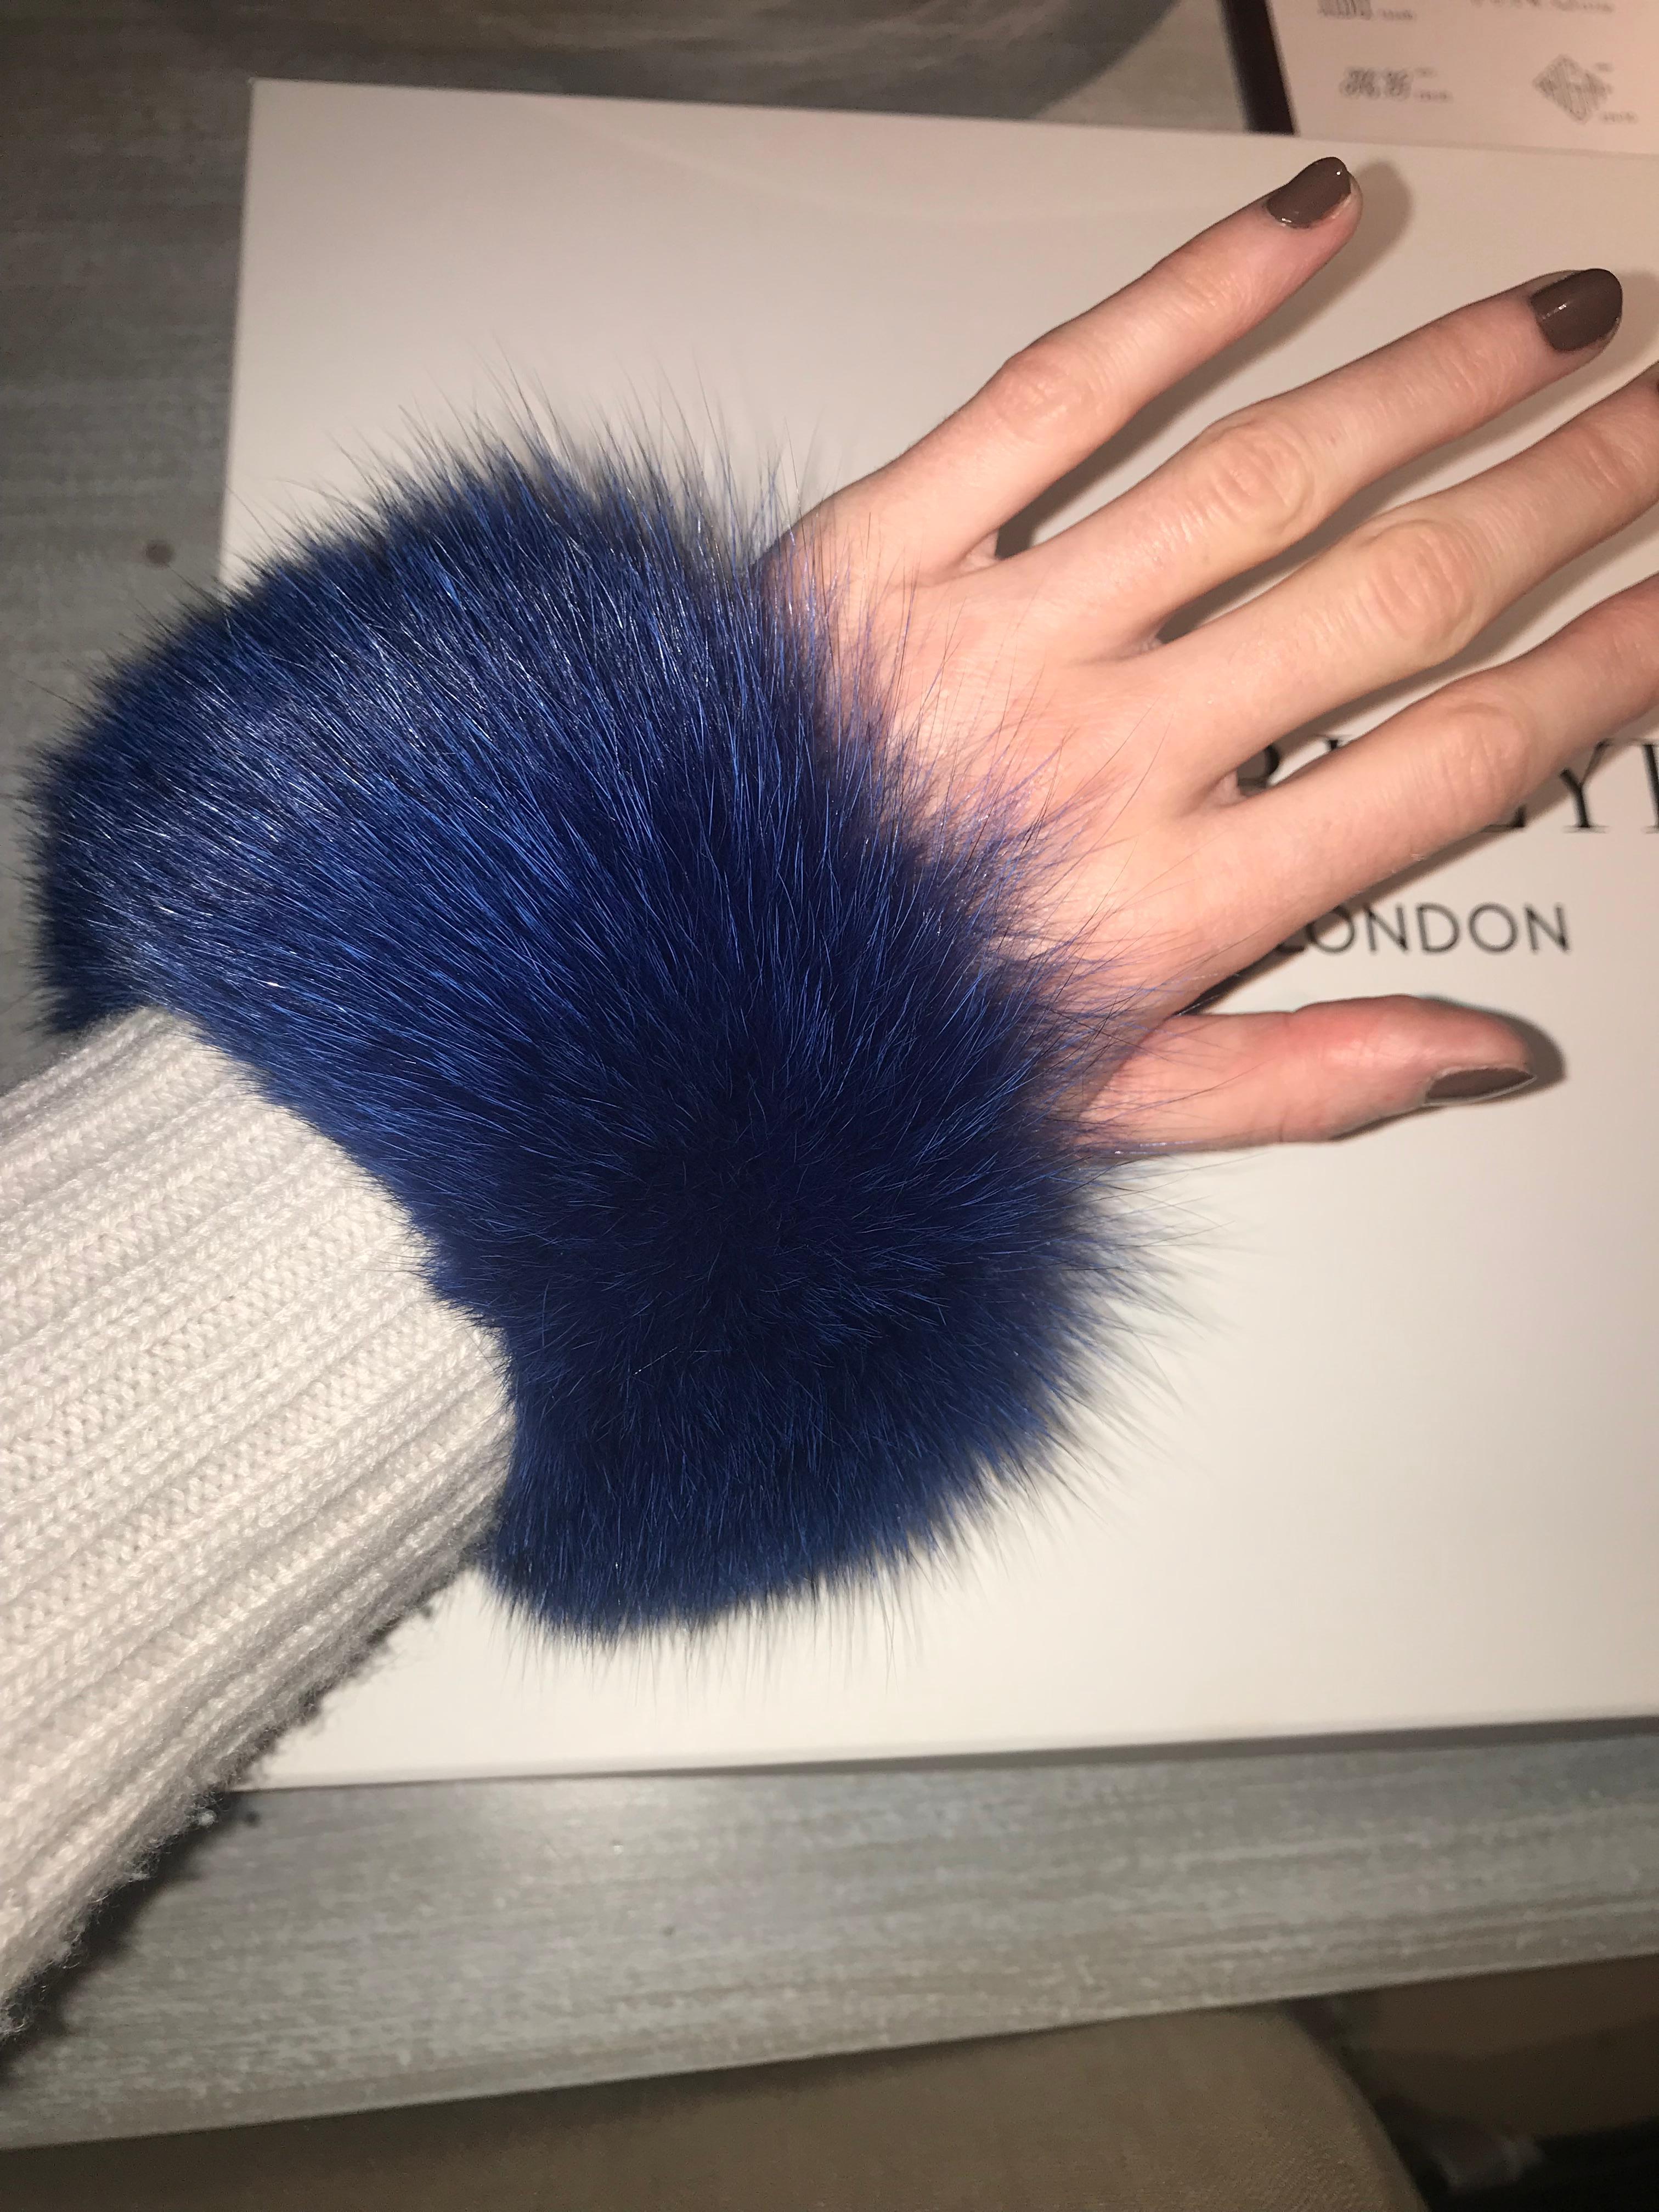 Verheyen London Snap on Fox Cuffs are the perfect accessory for winter/autumn dressing. Wear over any jumper or coat, these cuffs will jazz up any look and keep you staying cosy with style. 

All fur is origin assured and ethically sourced from